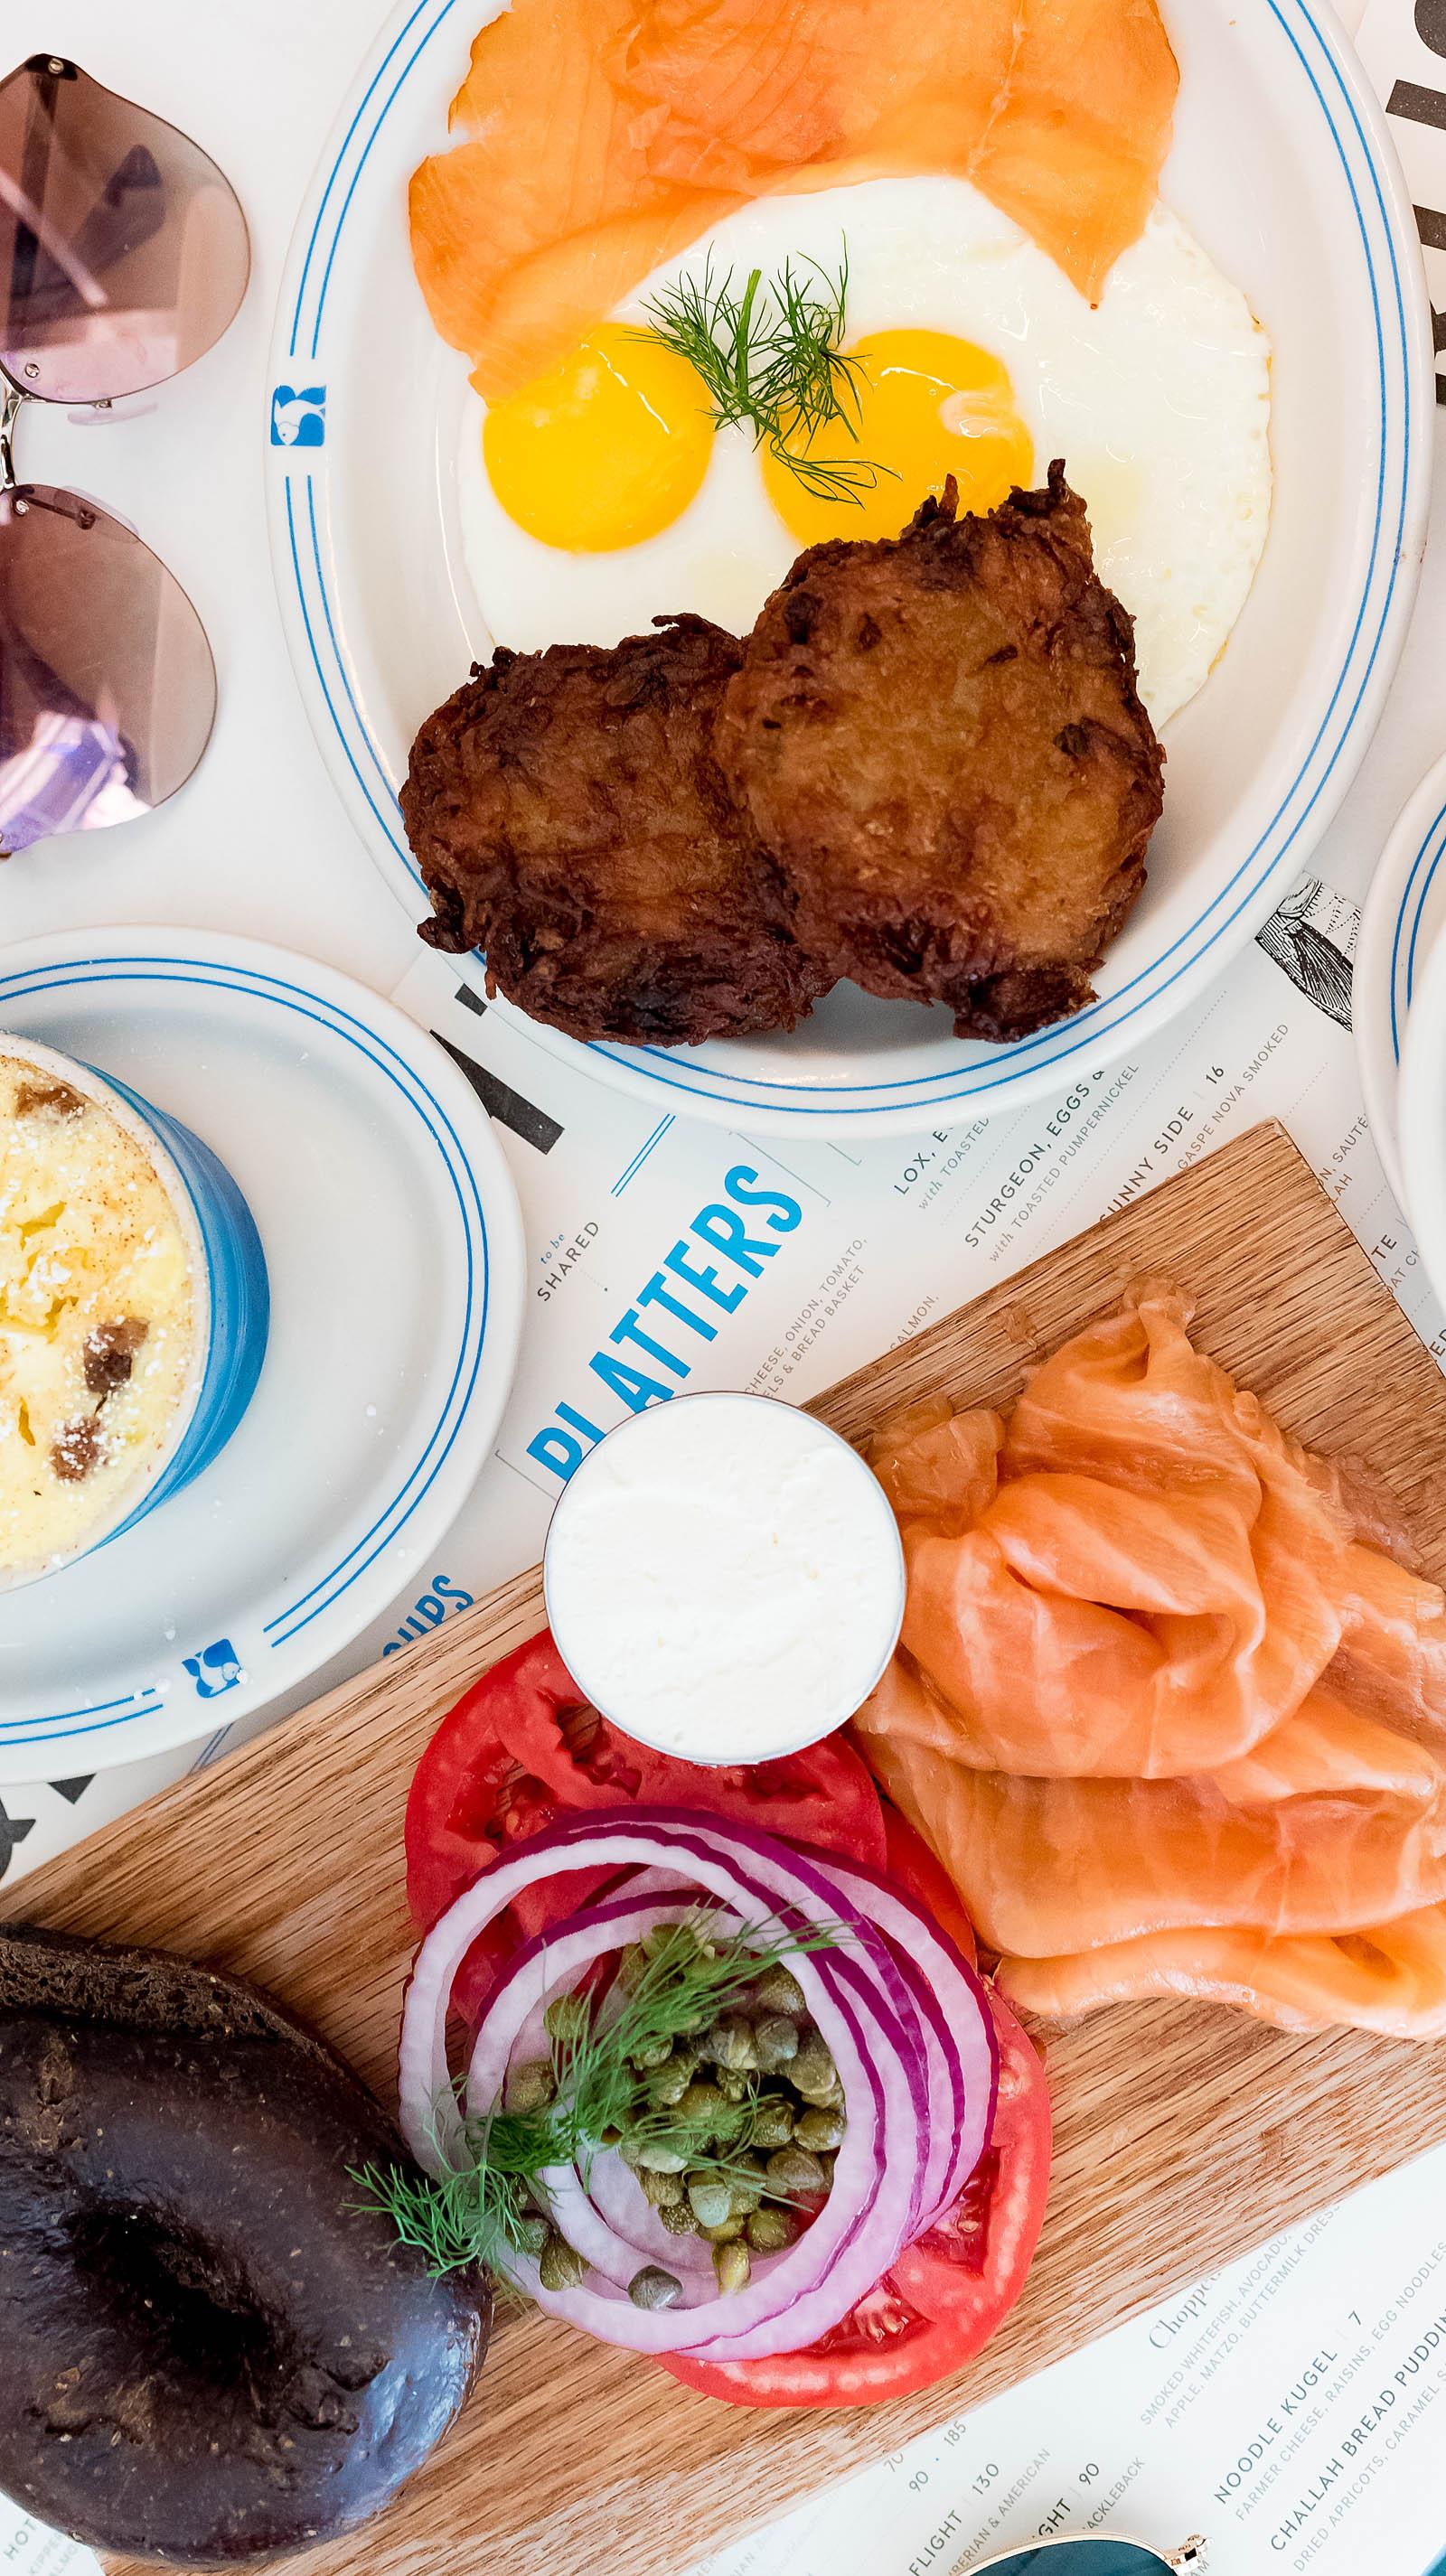 Russ & Daughters Cafe NYC